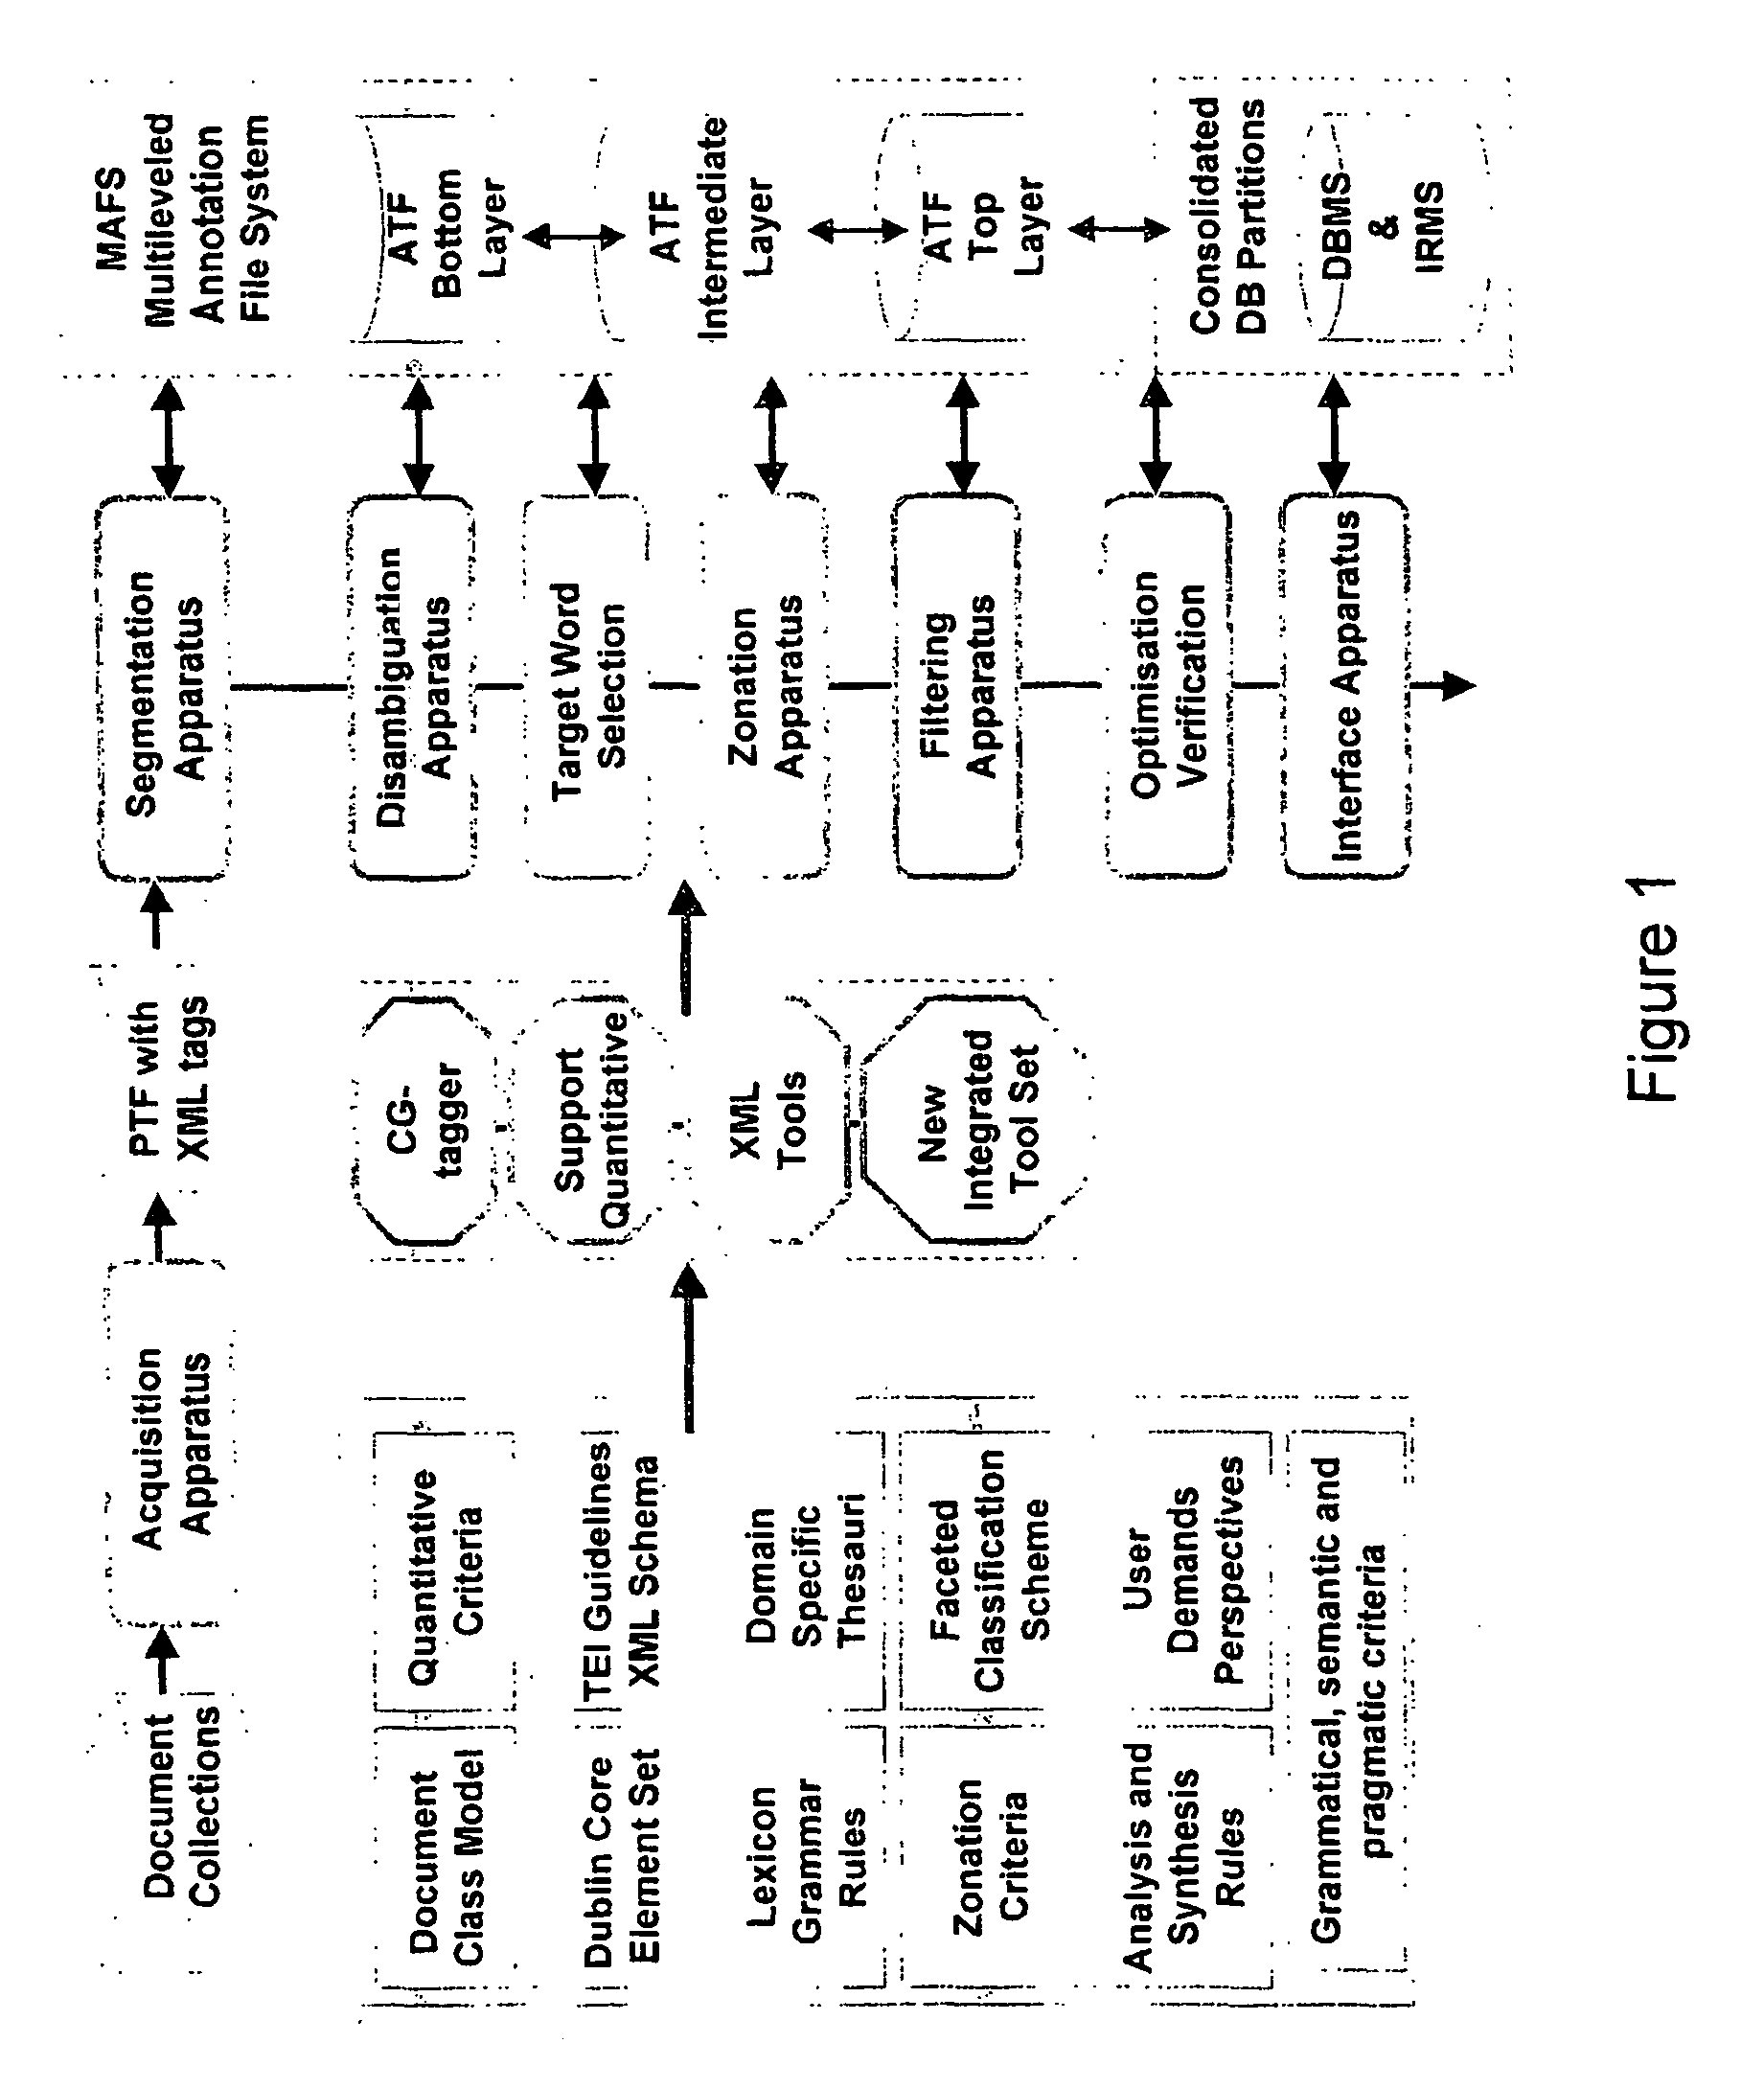 Method and apparatus for textual exploration discovery